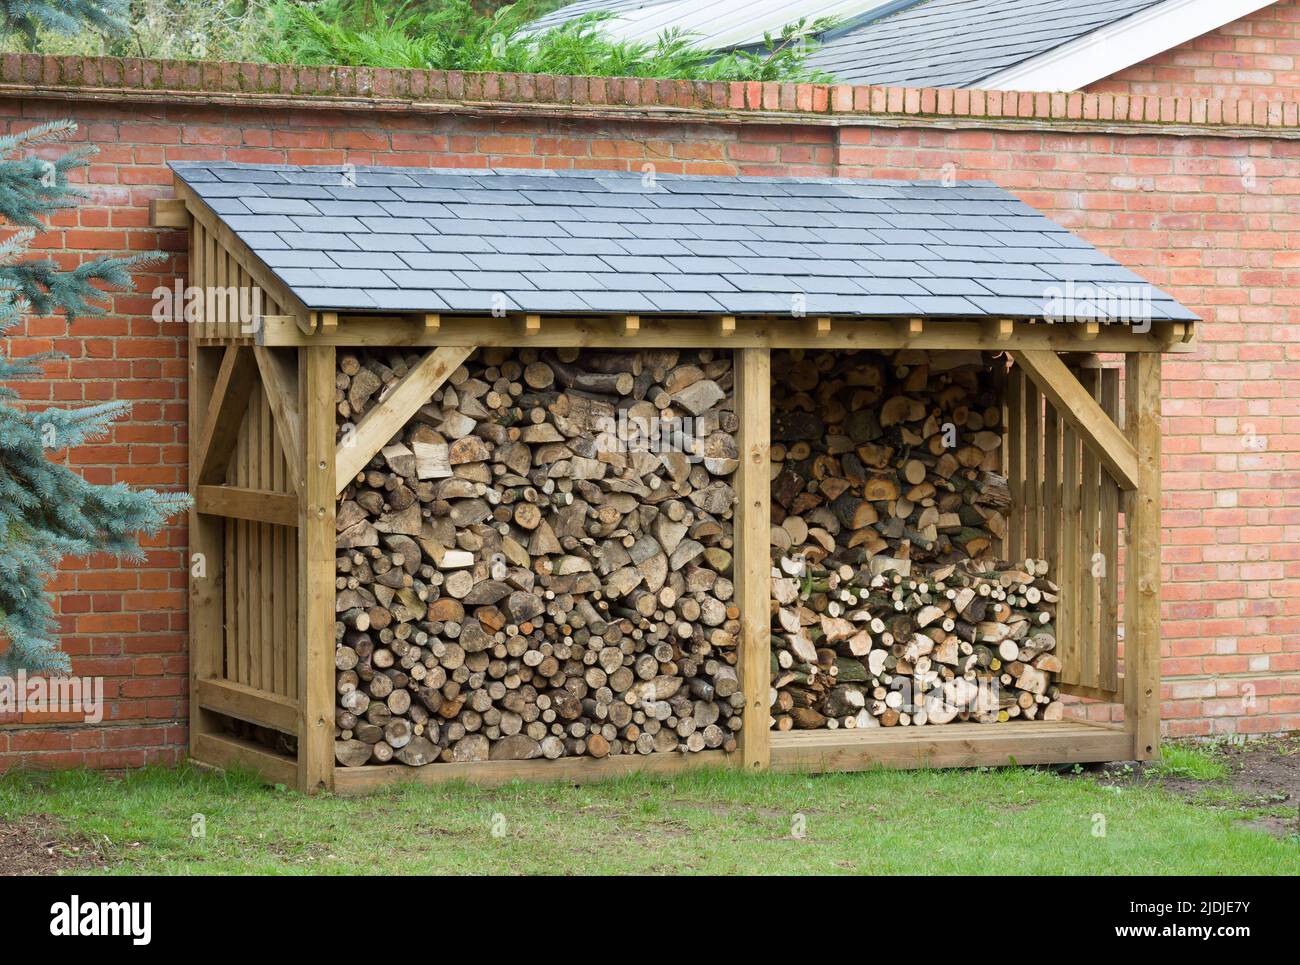 Wood shed, large log store filled with firewood, timber construction with a slate roof, UK Stock Photo